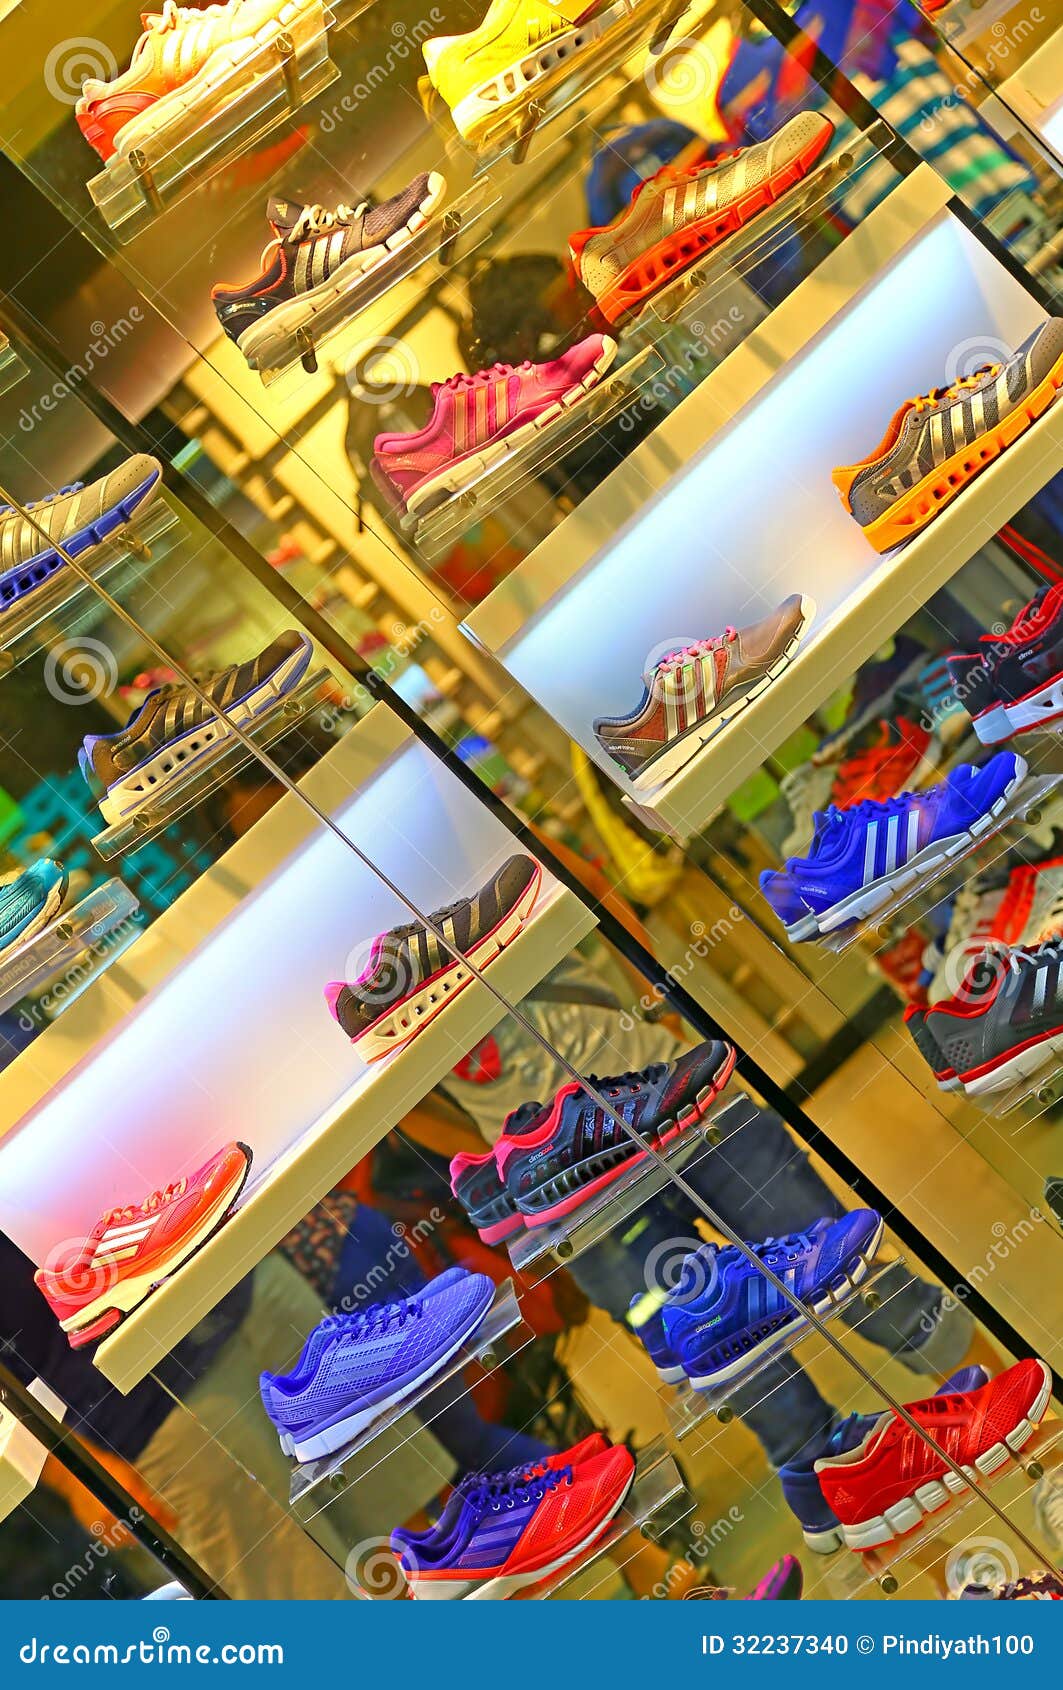 Adidas shoes editorial image. Image of rubber, sneakers - 32237340